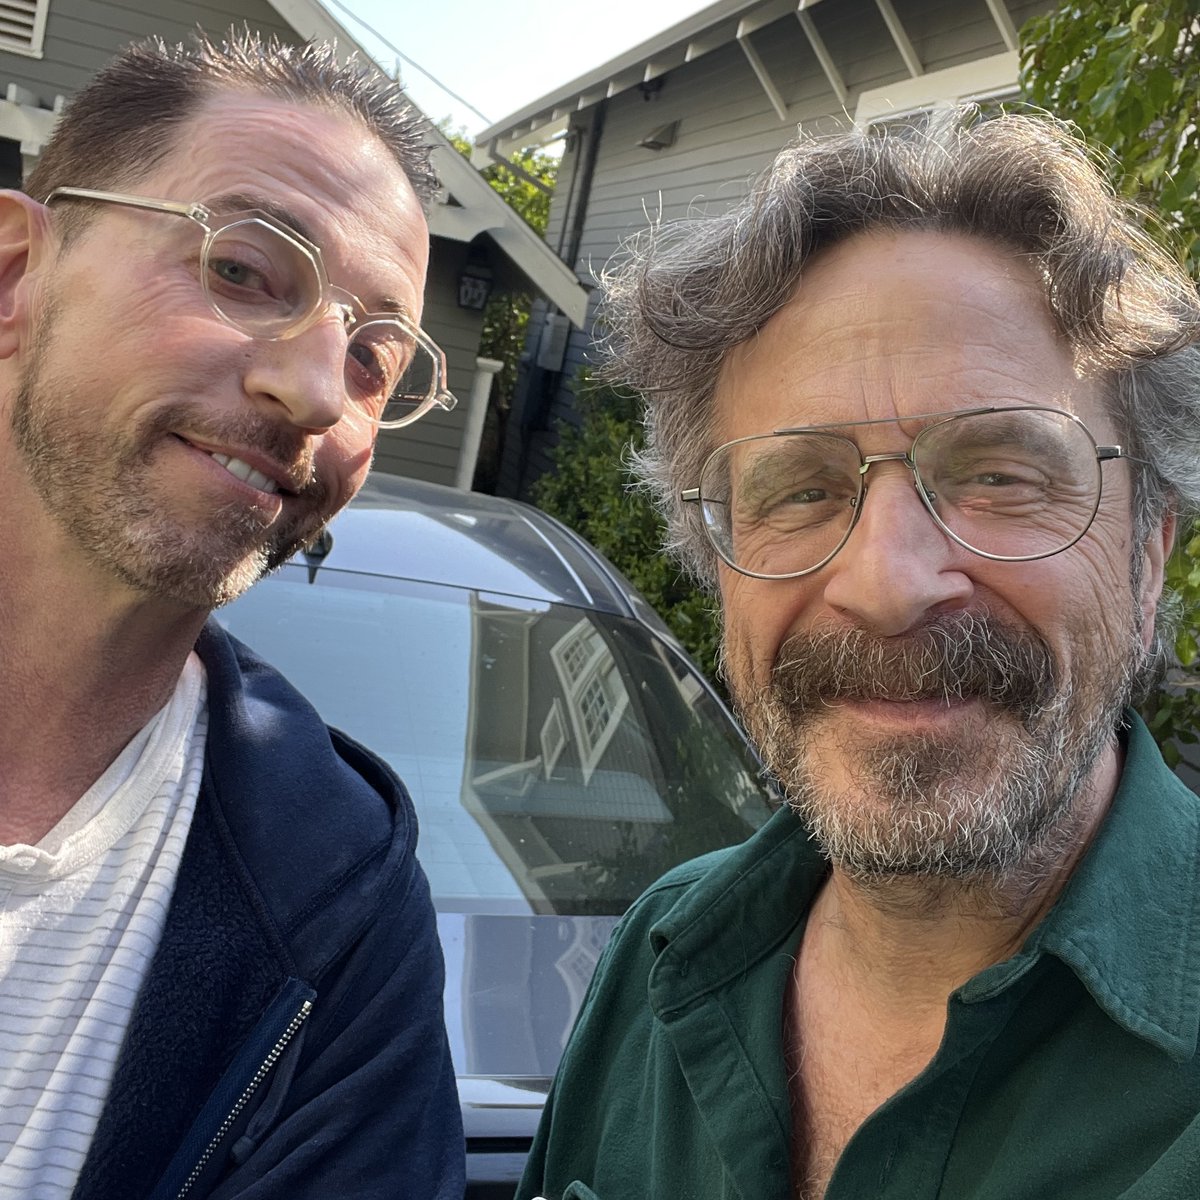 Comedian Neal Brennan on the latest episode of WTF with Marc Maron! 
#BookedbyCTB #CentralTalentBooking #Podcast #Podcaster
wtfpod.com/podcast/episod…